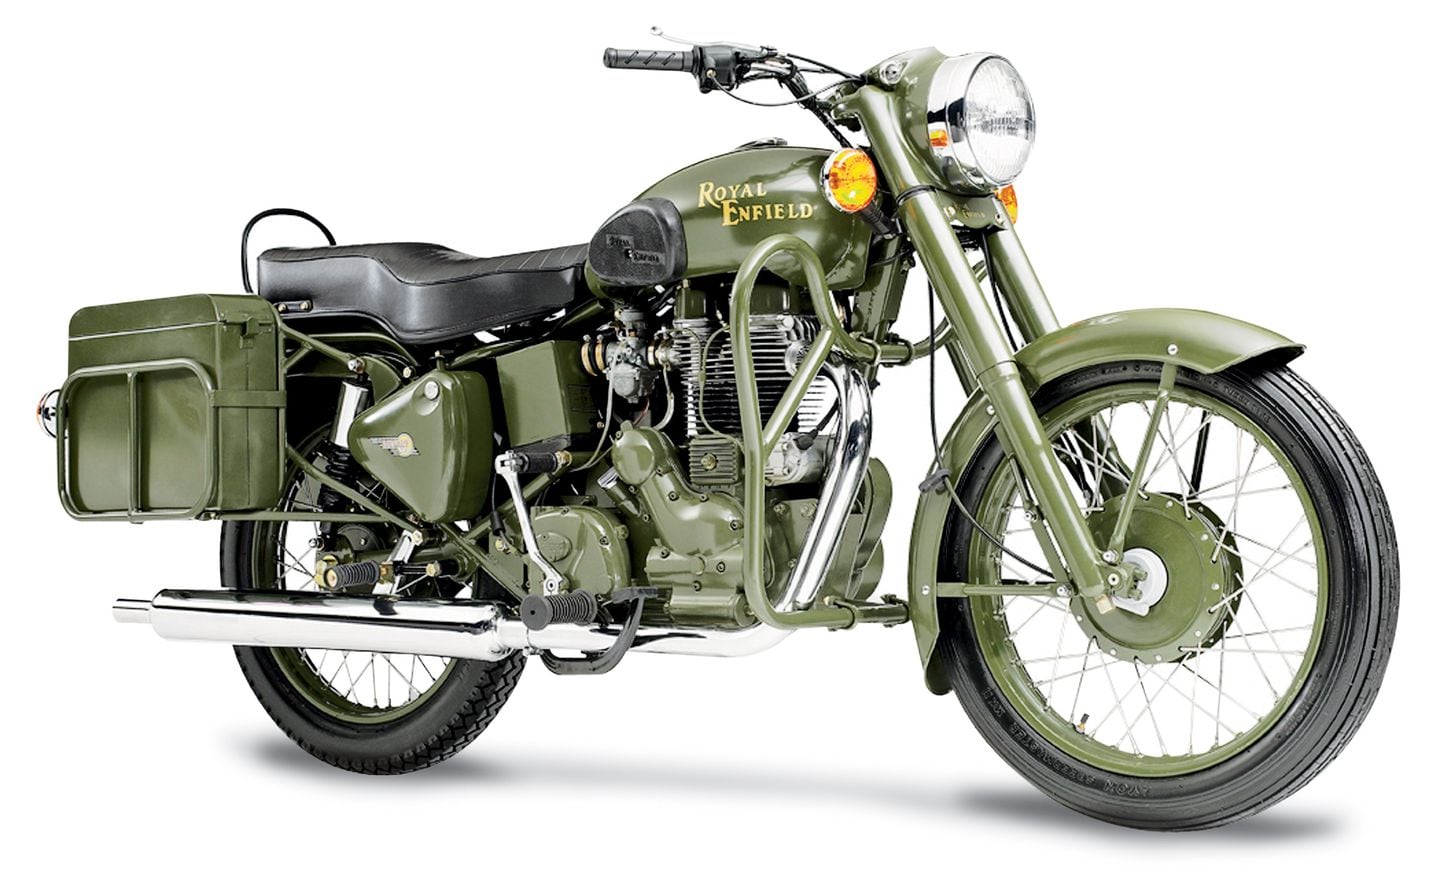 Royal Enfield Bullet 500 Military Motorcycle Test Ride | Cycle World